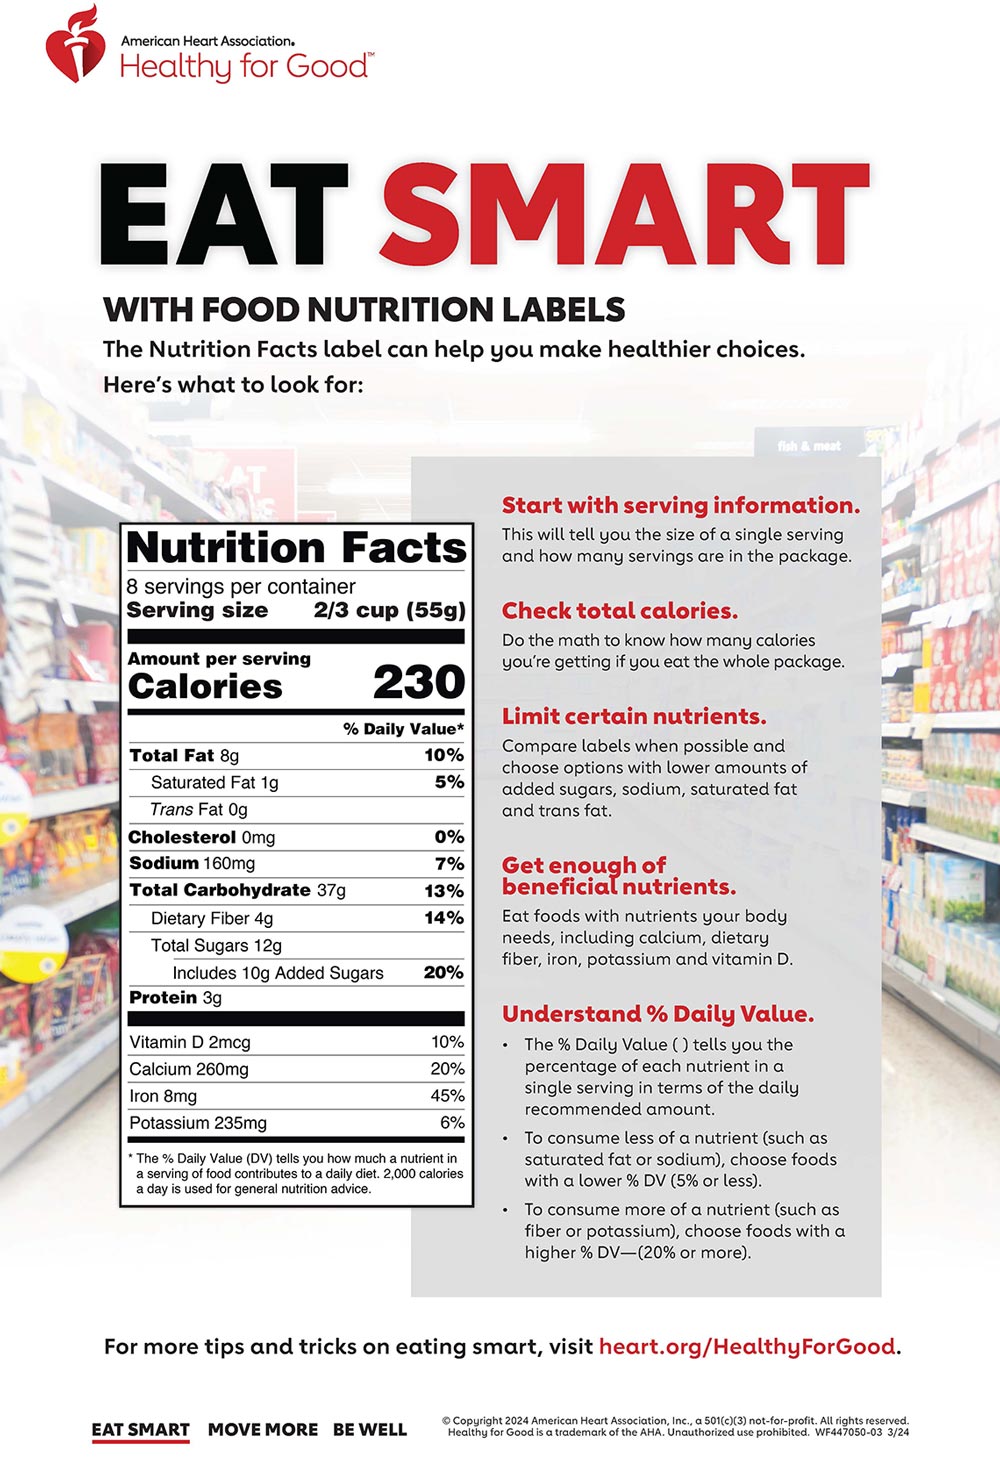 What's New about the New Nutrition Facts Food Label? – Boston Heart